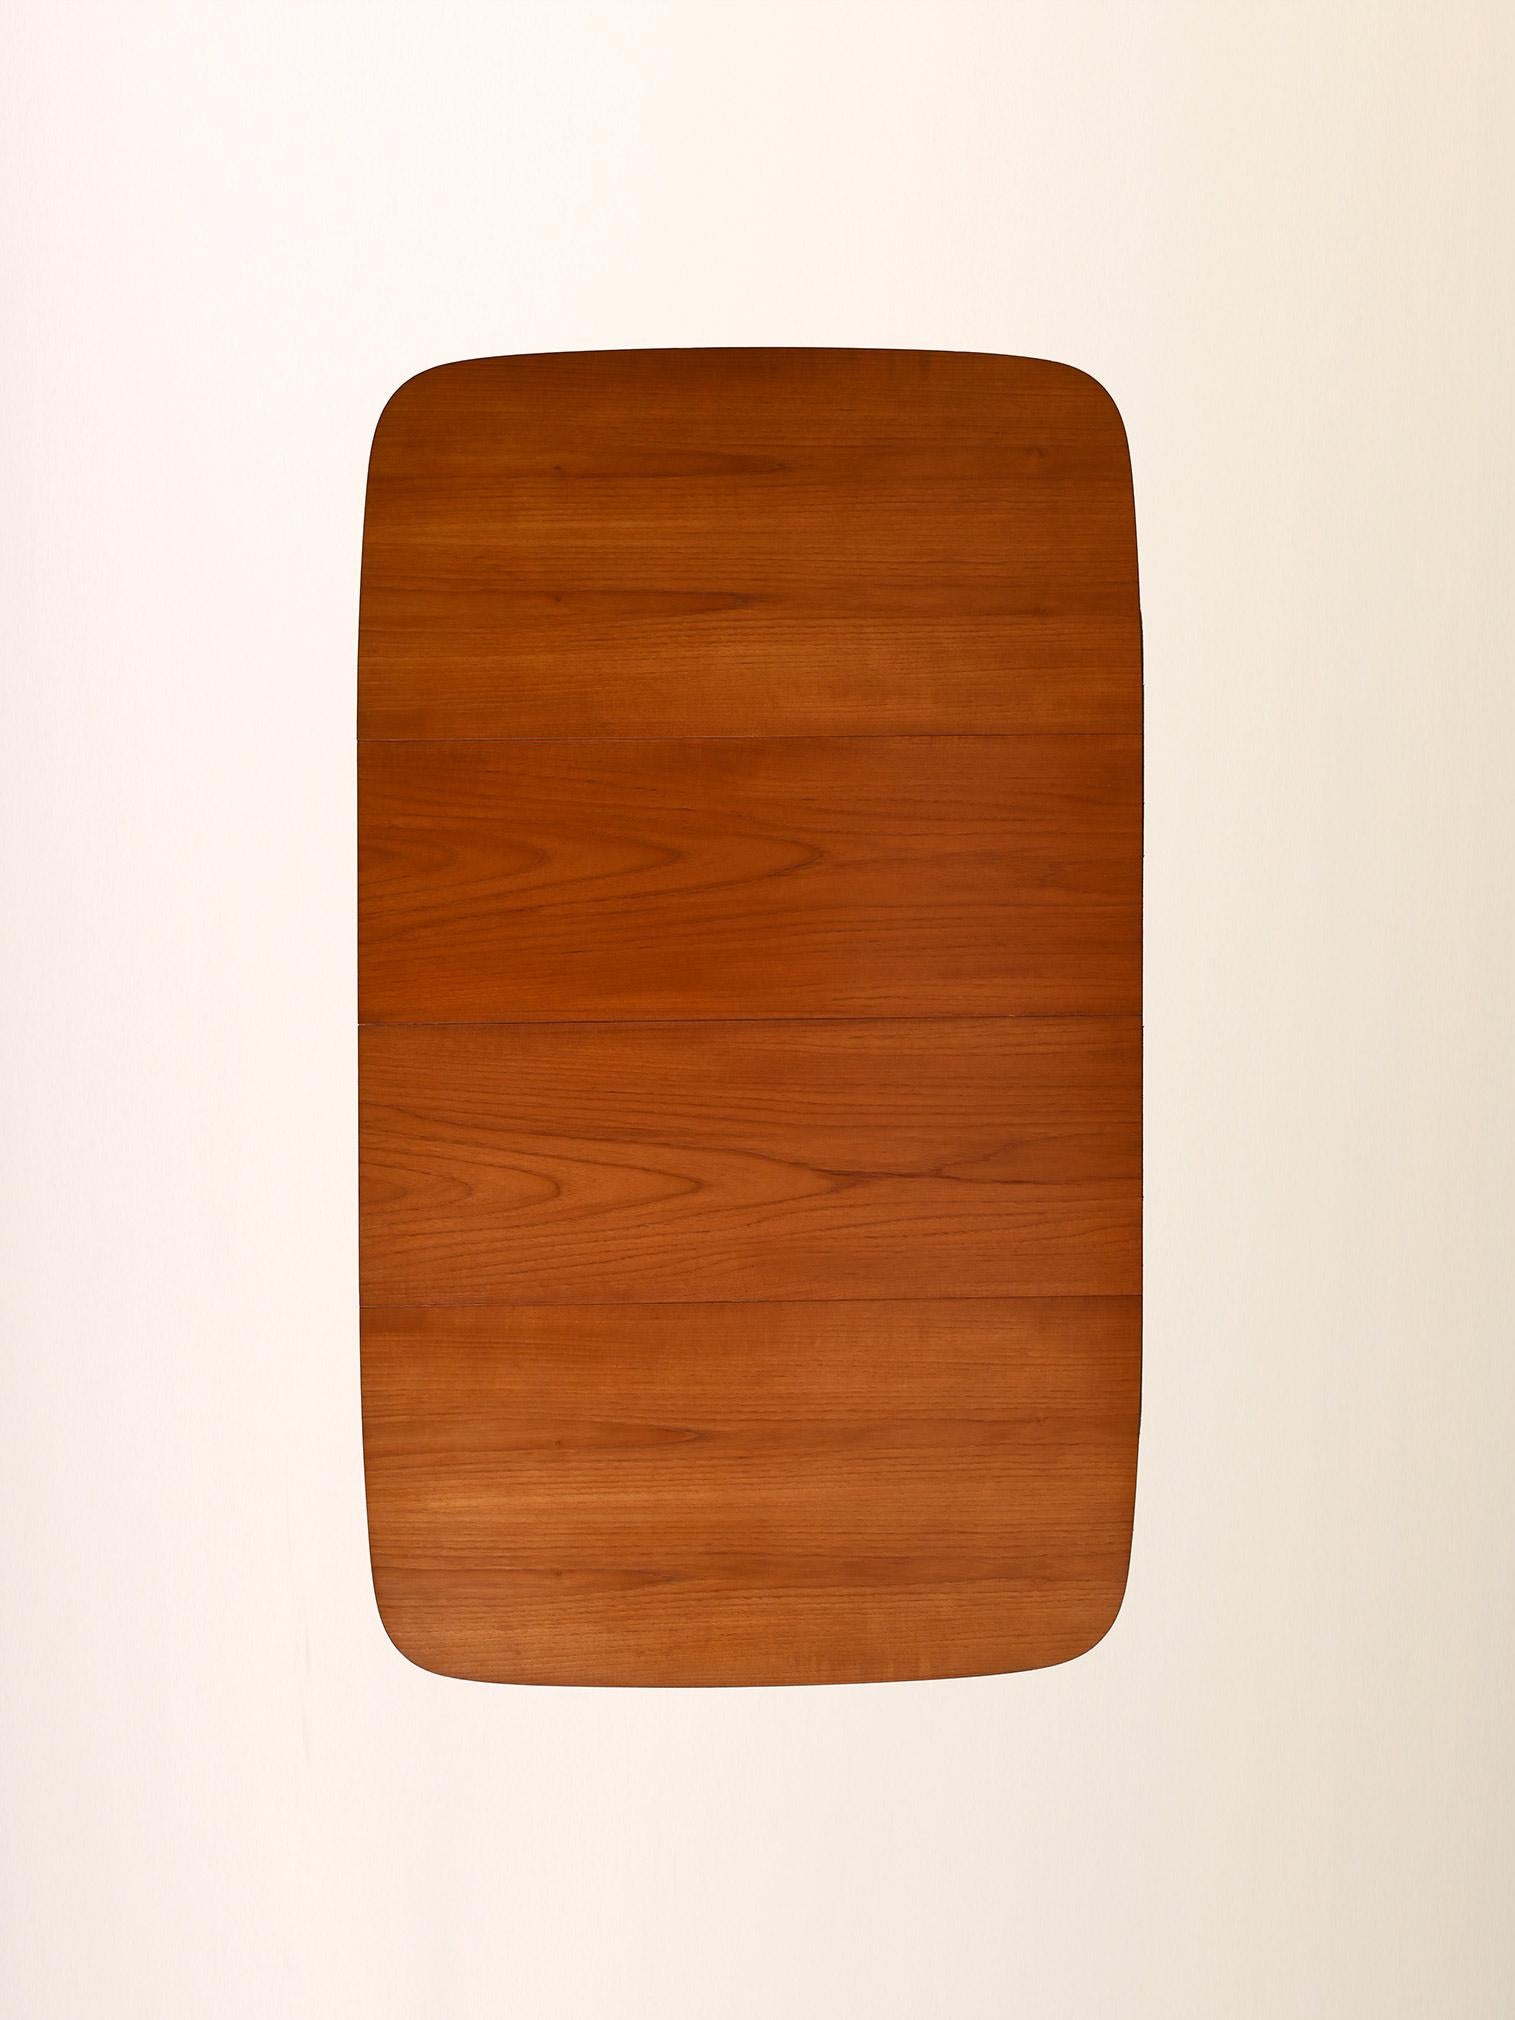 Square table with rounded corners 4